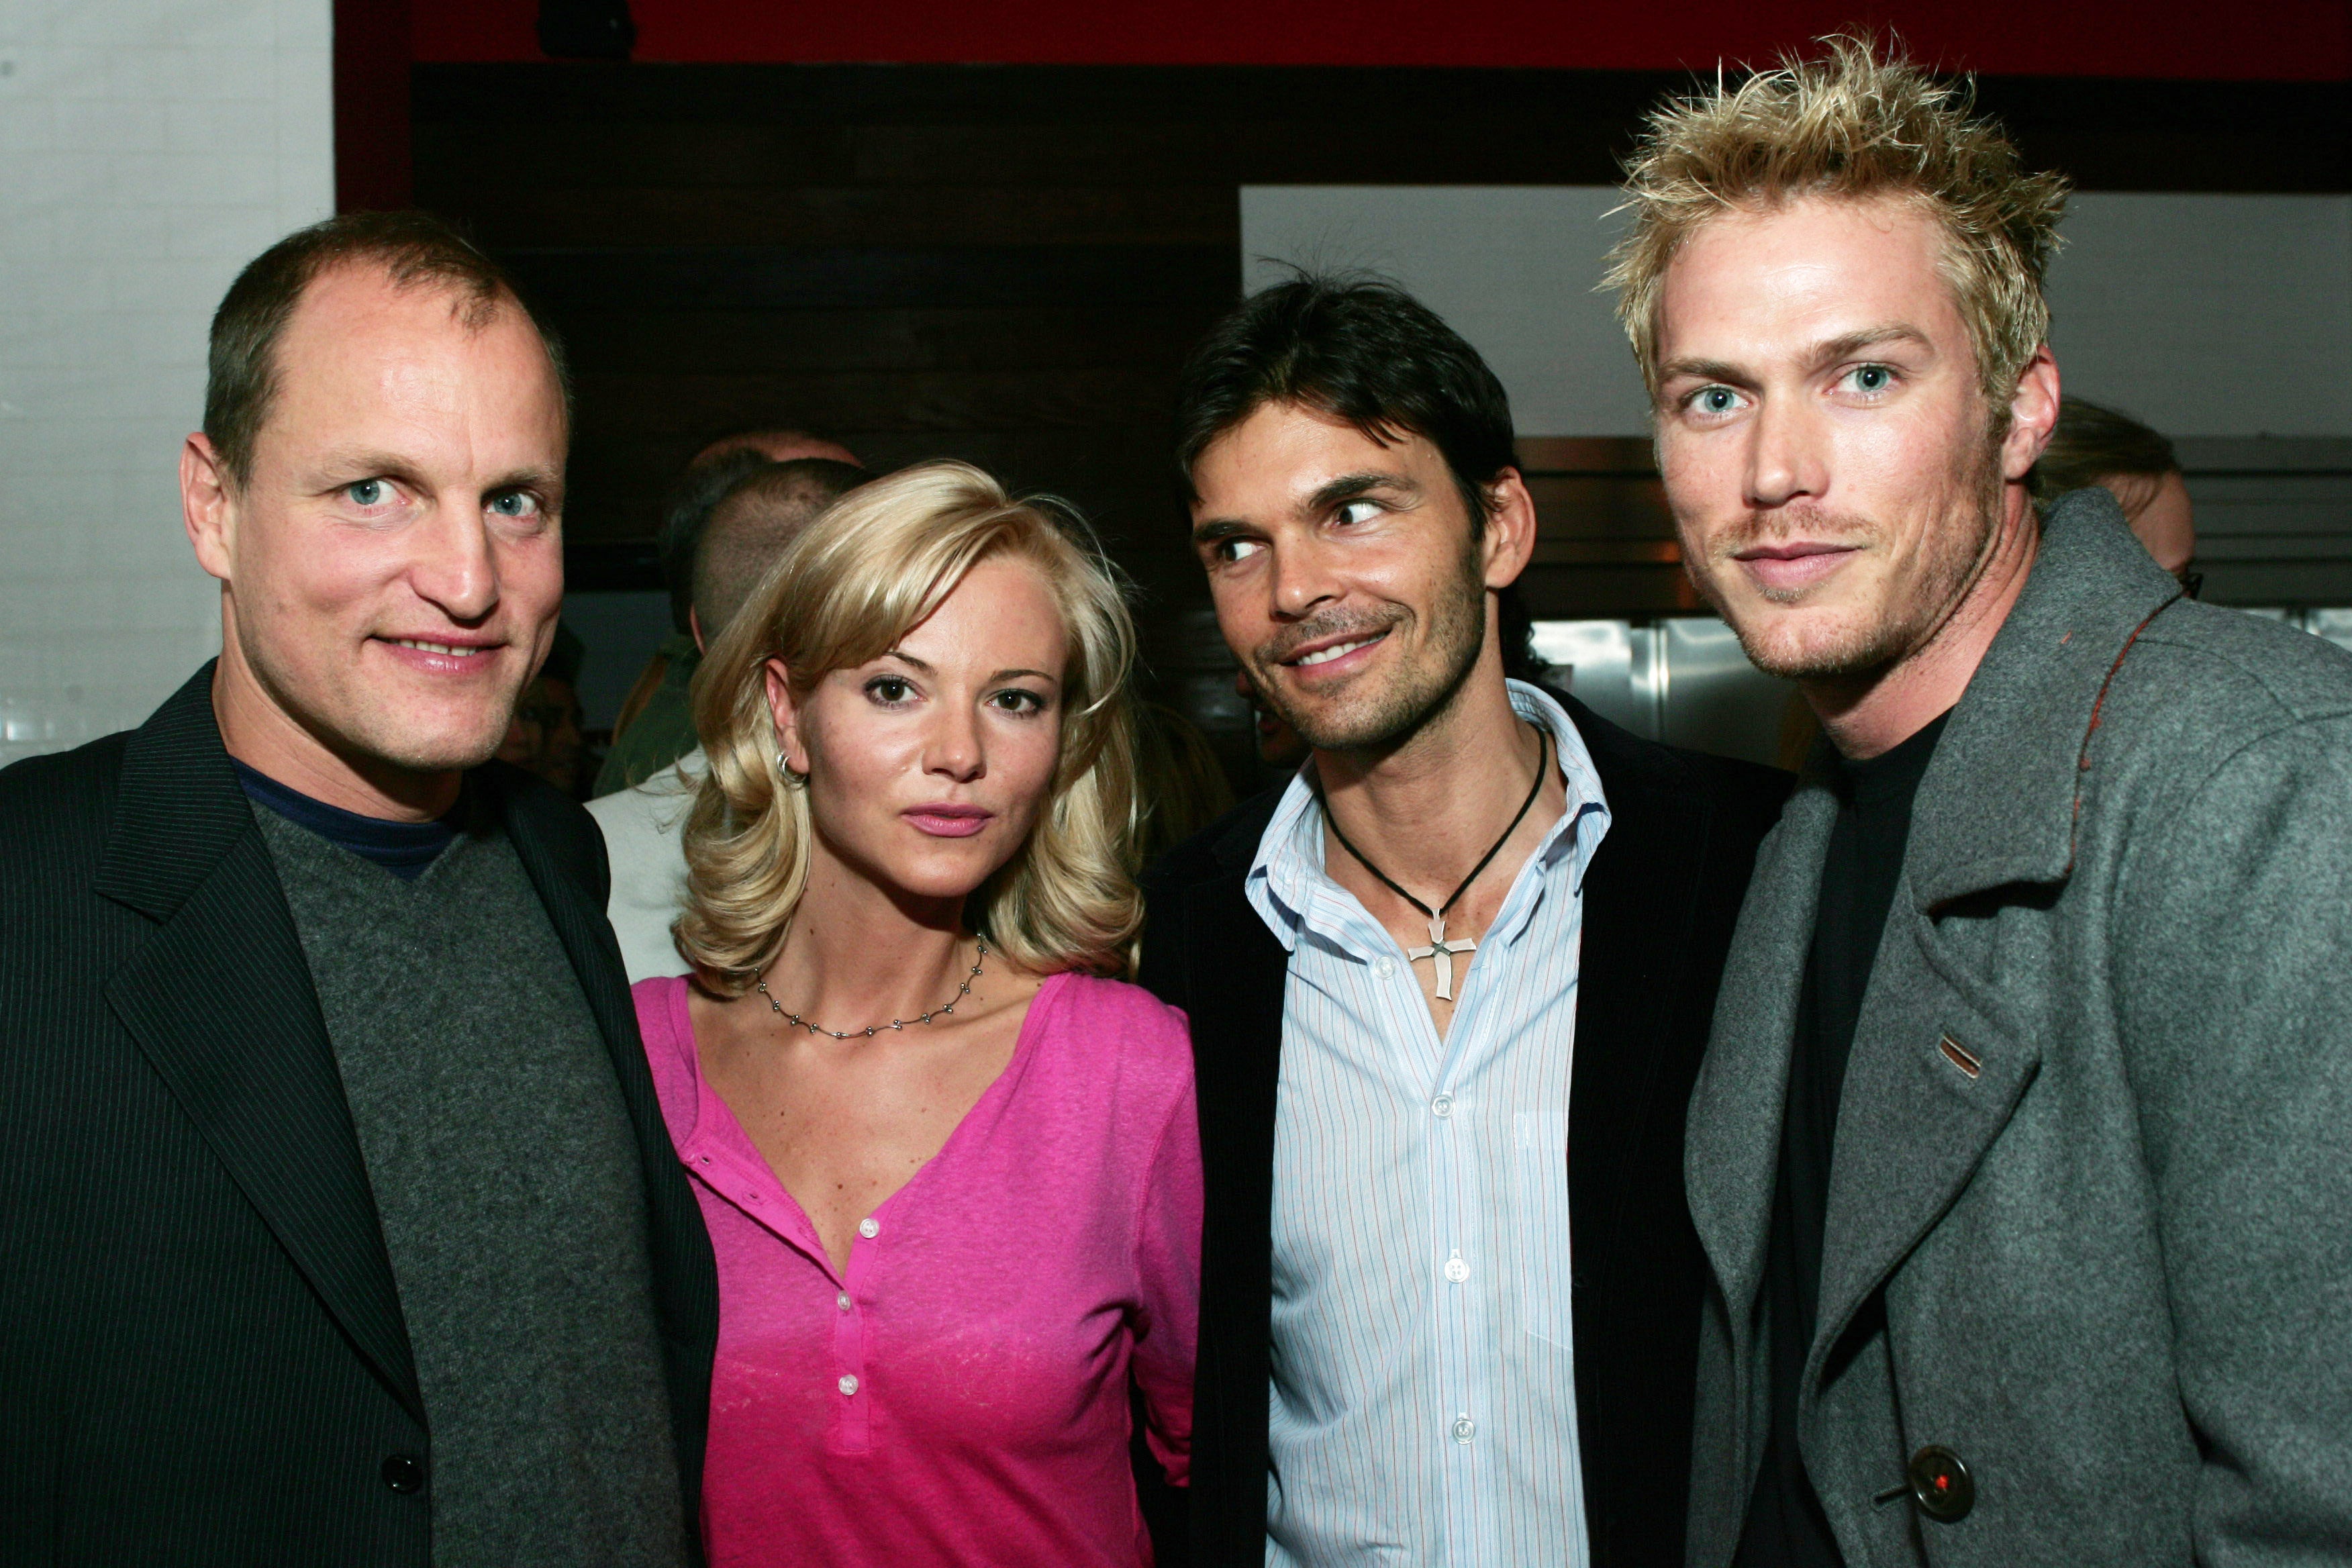 Woody Harrelson, Sarma Melngailis, Pure Food and Wine chef Matthew Kenney, and actor Jason Lewis at the celebration of the documentary film ‘Go Further’ (starring Harrelson) on 8 November 2004 in New York